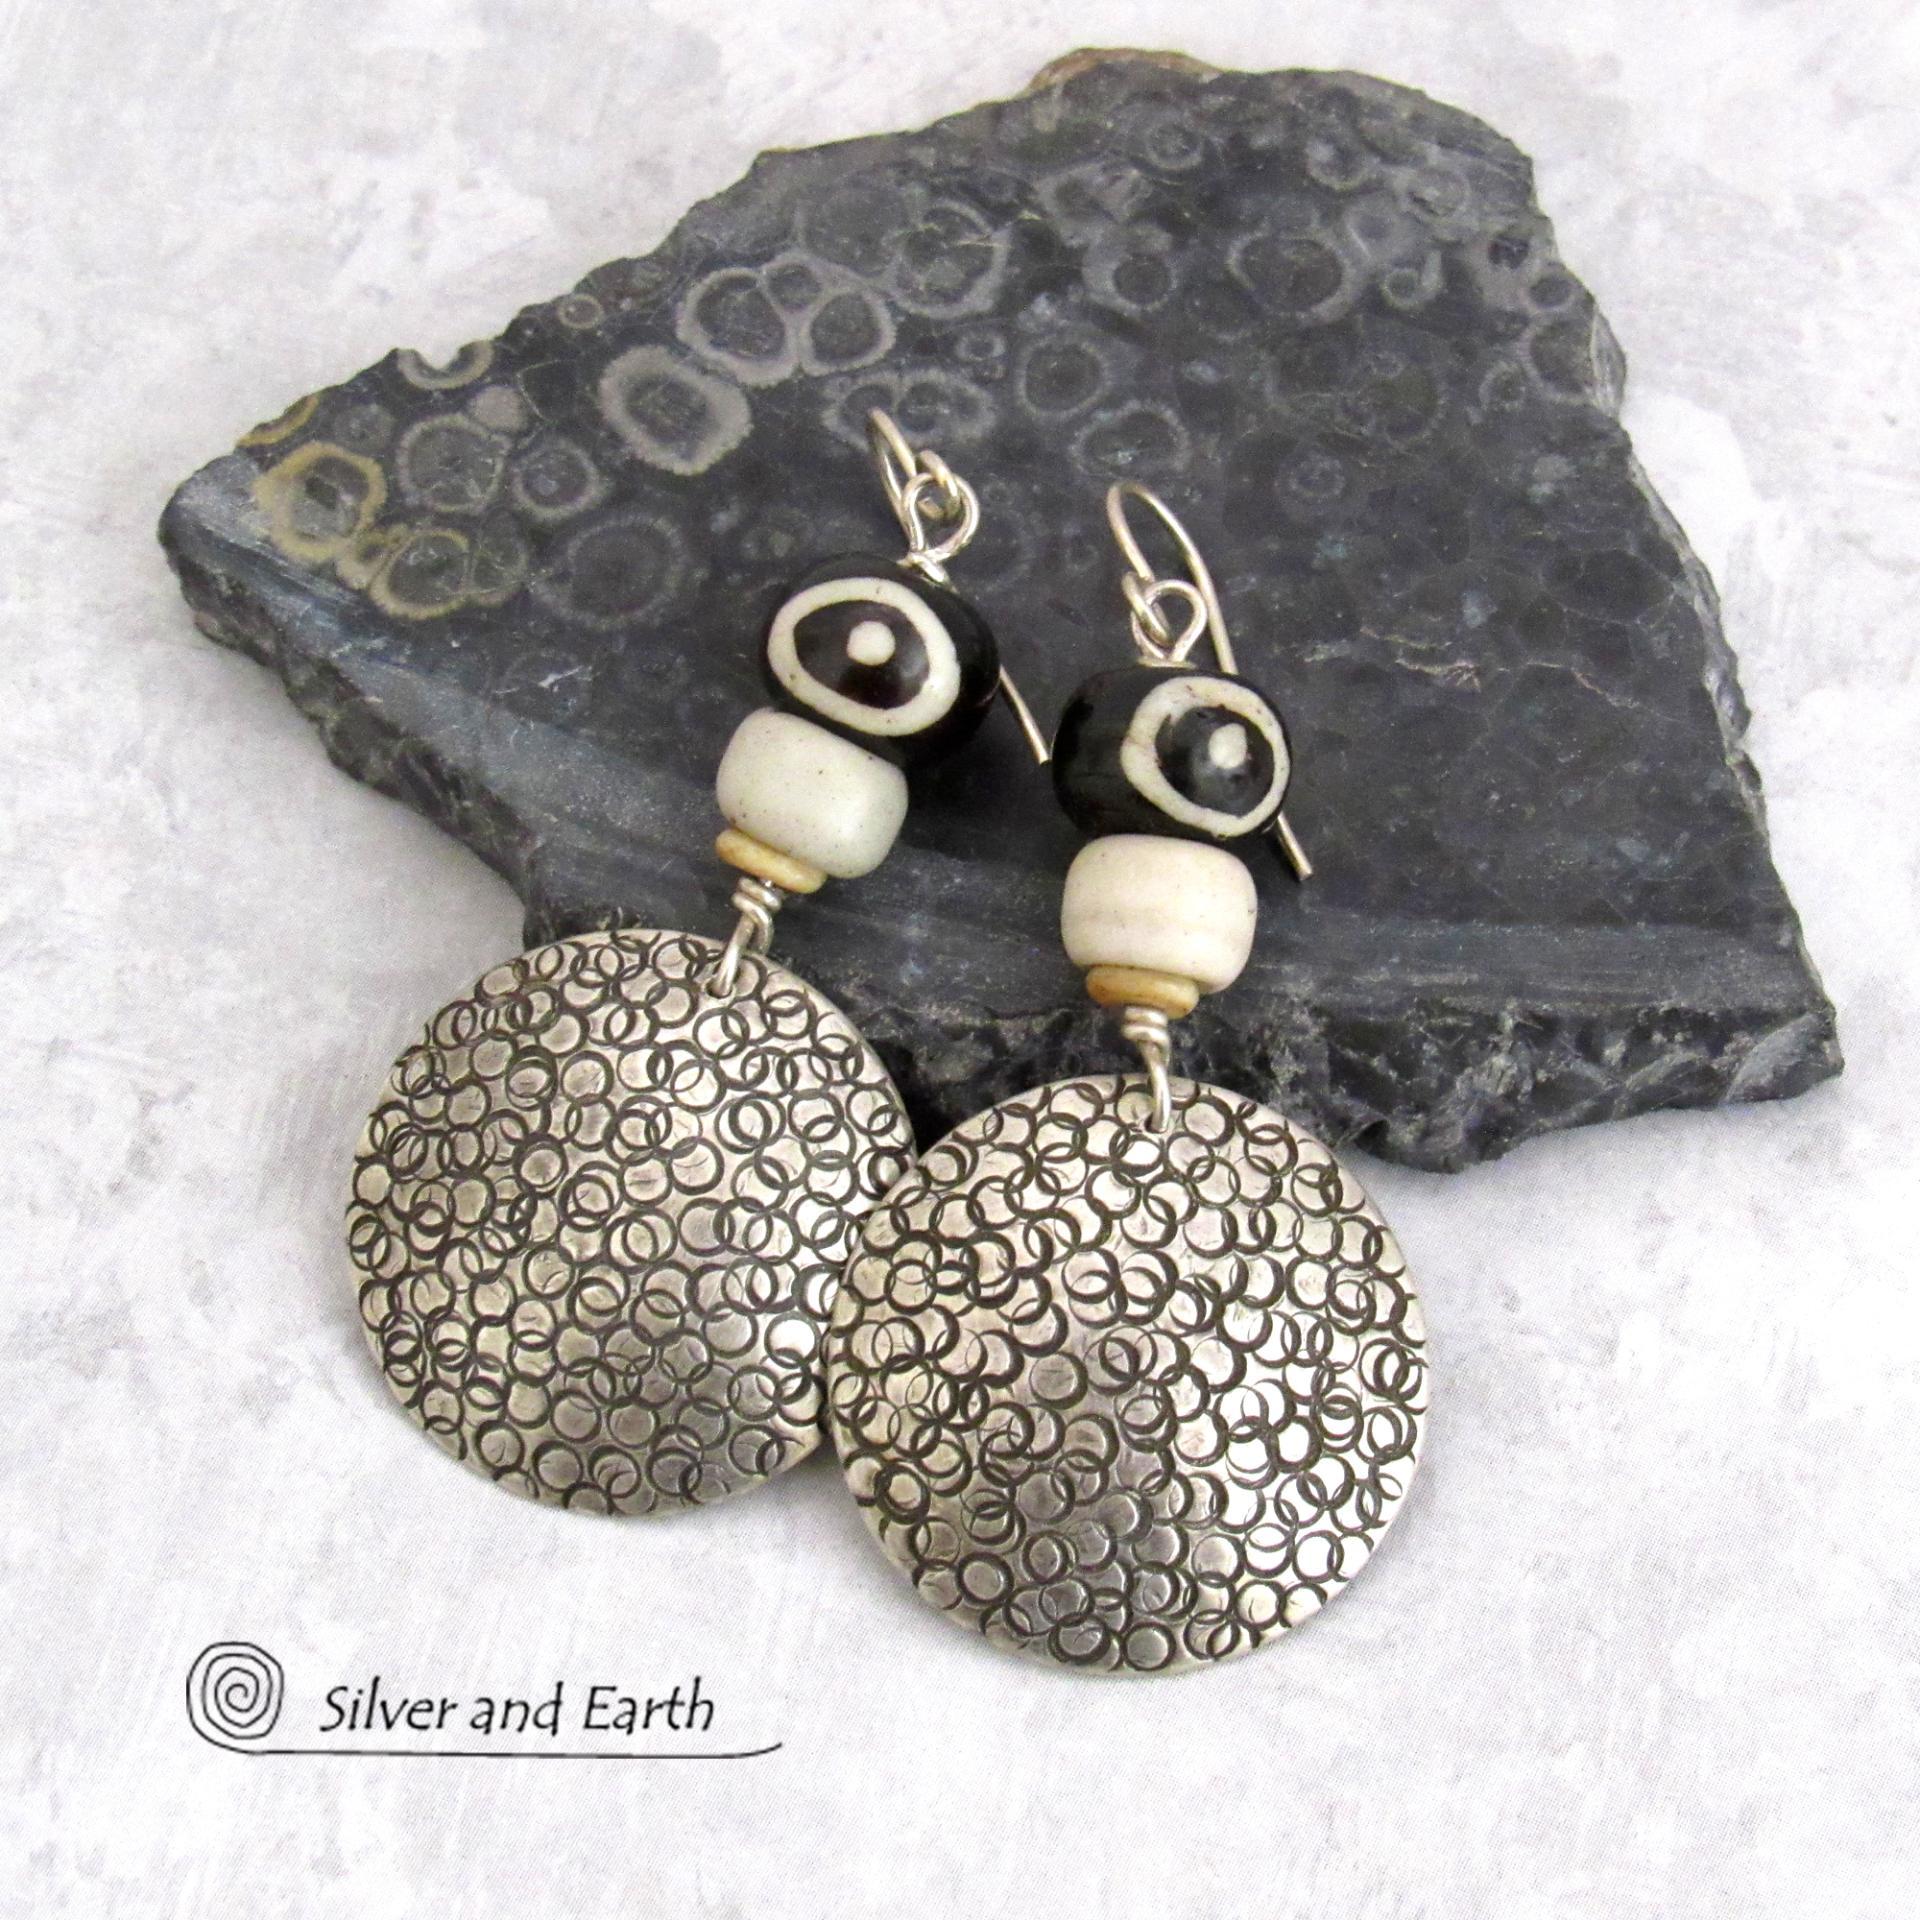 Big Round Sterling Silver Earrings with African Batik Bone & Glass Beads - Bold Ethnic Tribal Style Jewelry